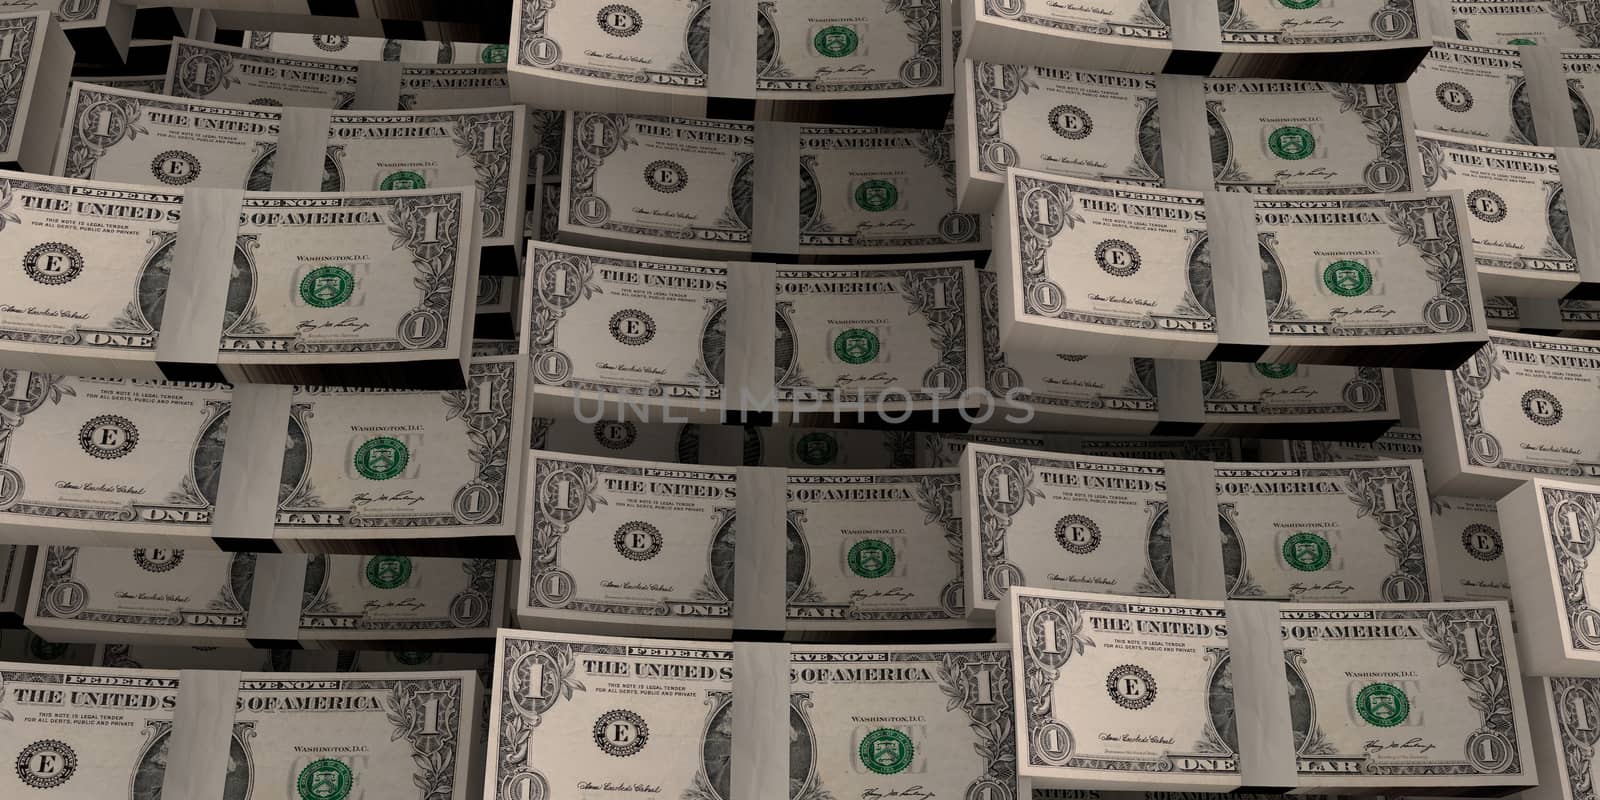 Scattered wads of USA american dollars. Money, finance, investment, business, occupation, work, pay, abundance wealth, being rich concept 3D rendered illustration background